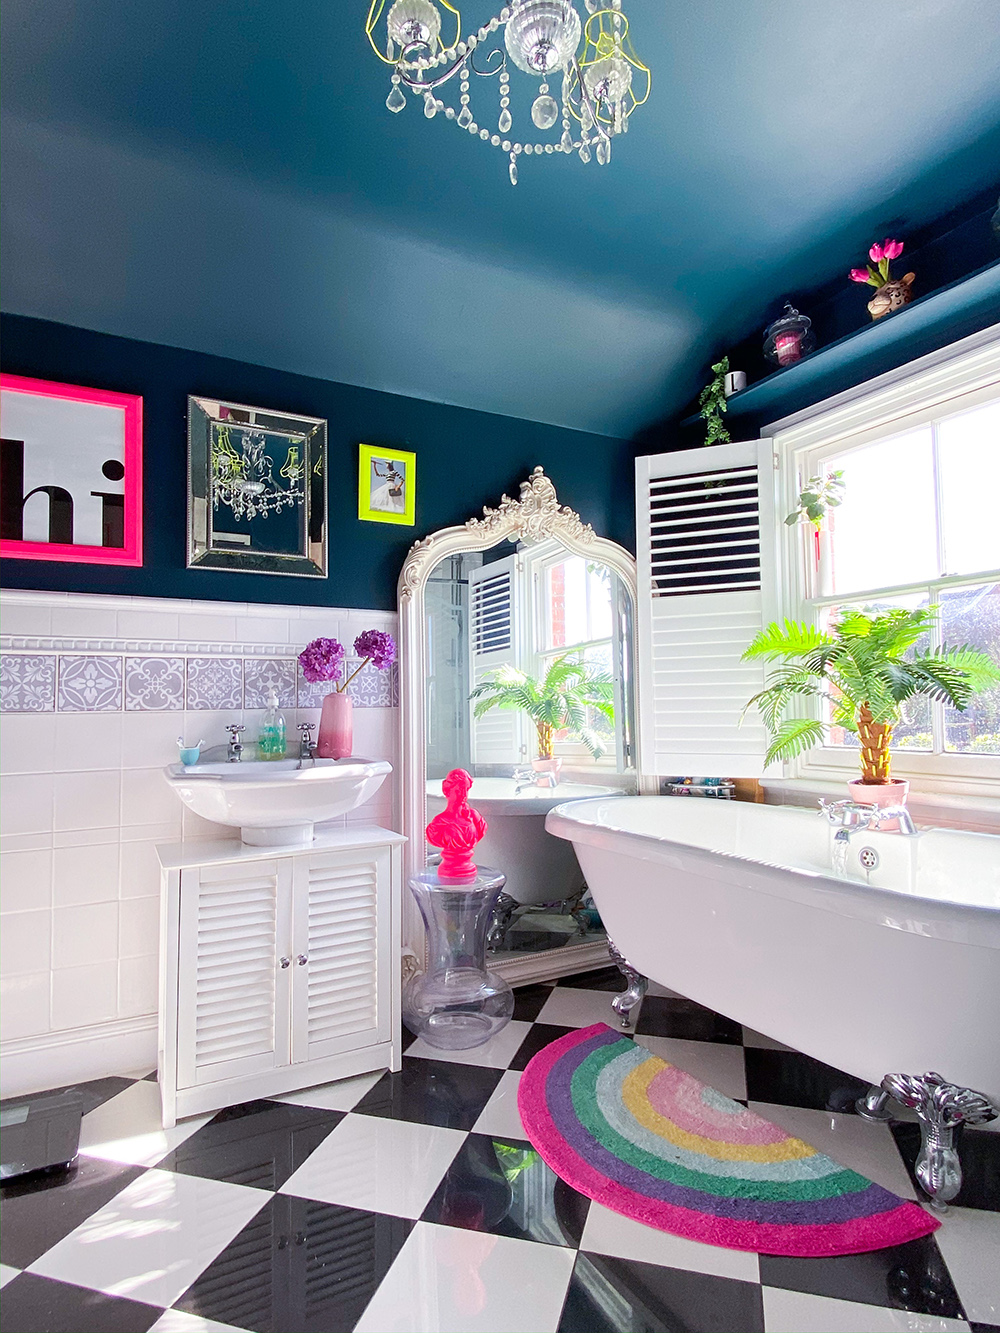 The main bathroom in this fun family home with with claw foot bathtub and quirky, neon pops of colour